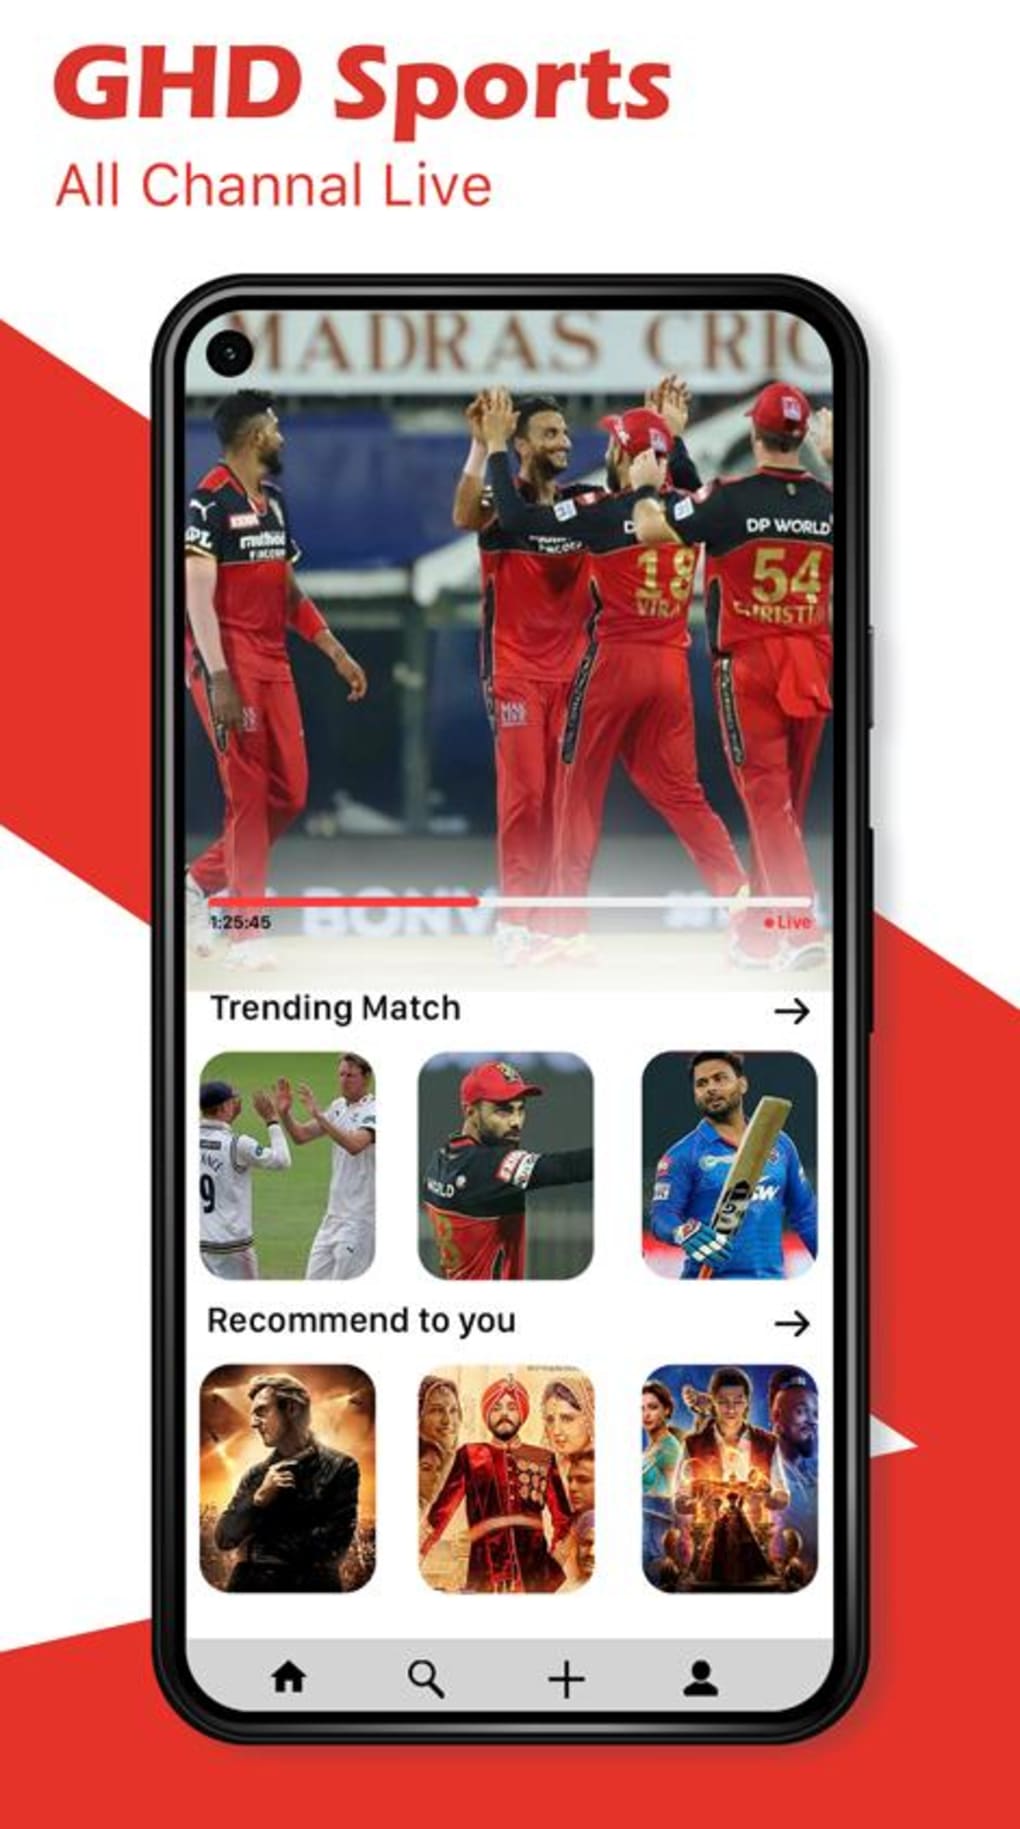 Live Sports GHD TV Guide for Android